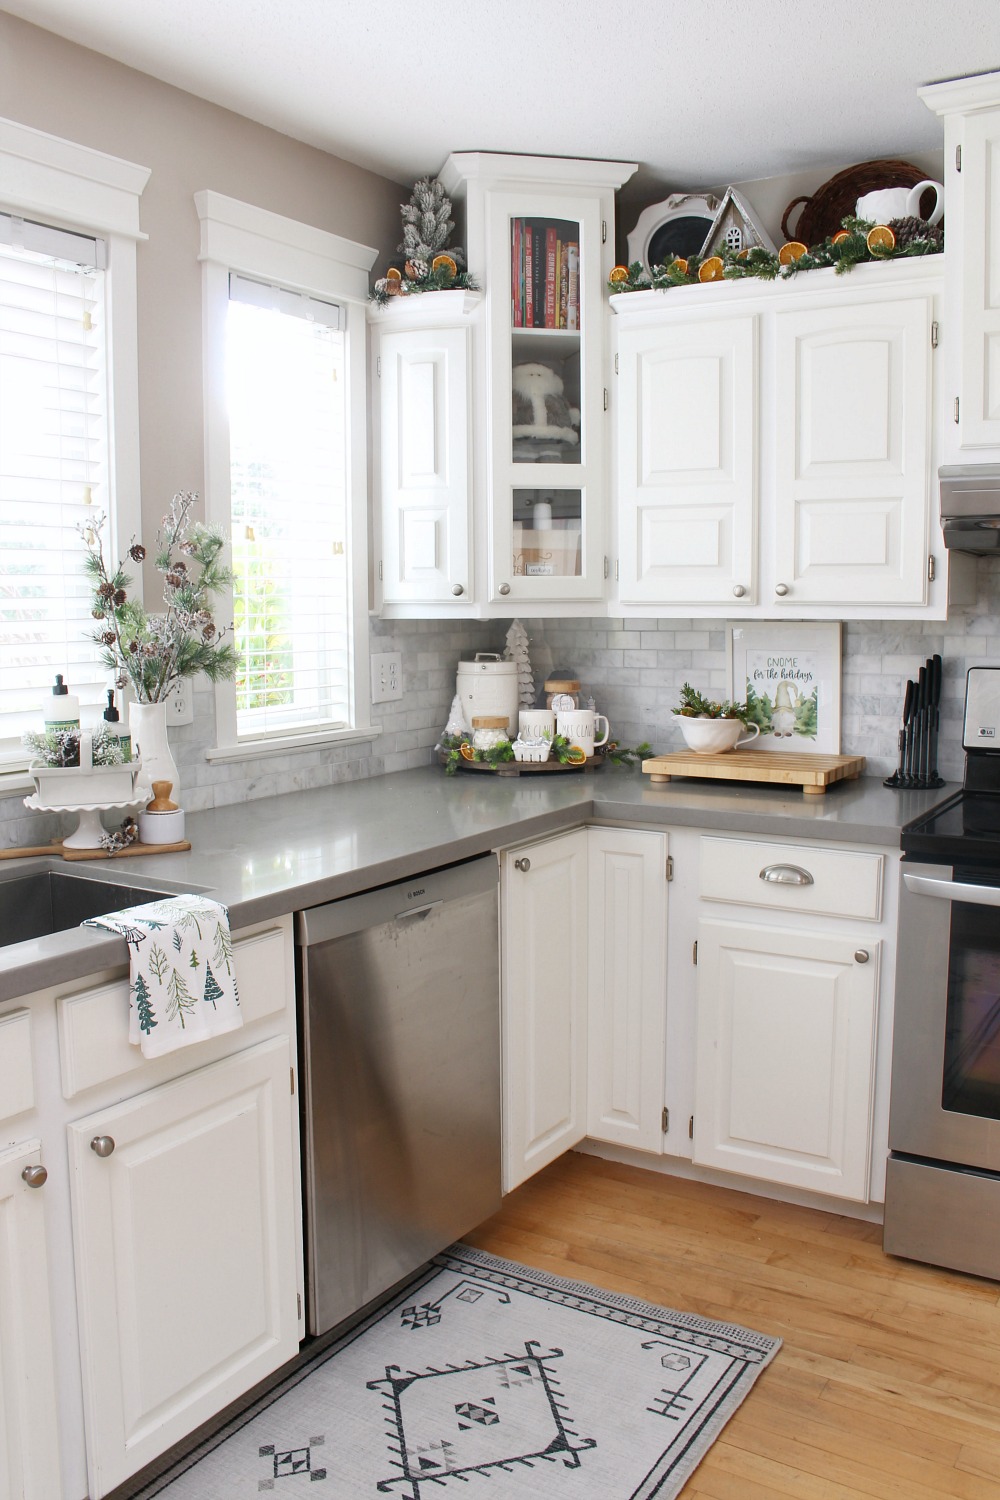 White modern farmhouse style kitchen decorated for Christmas in green and white with dried oranges.